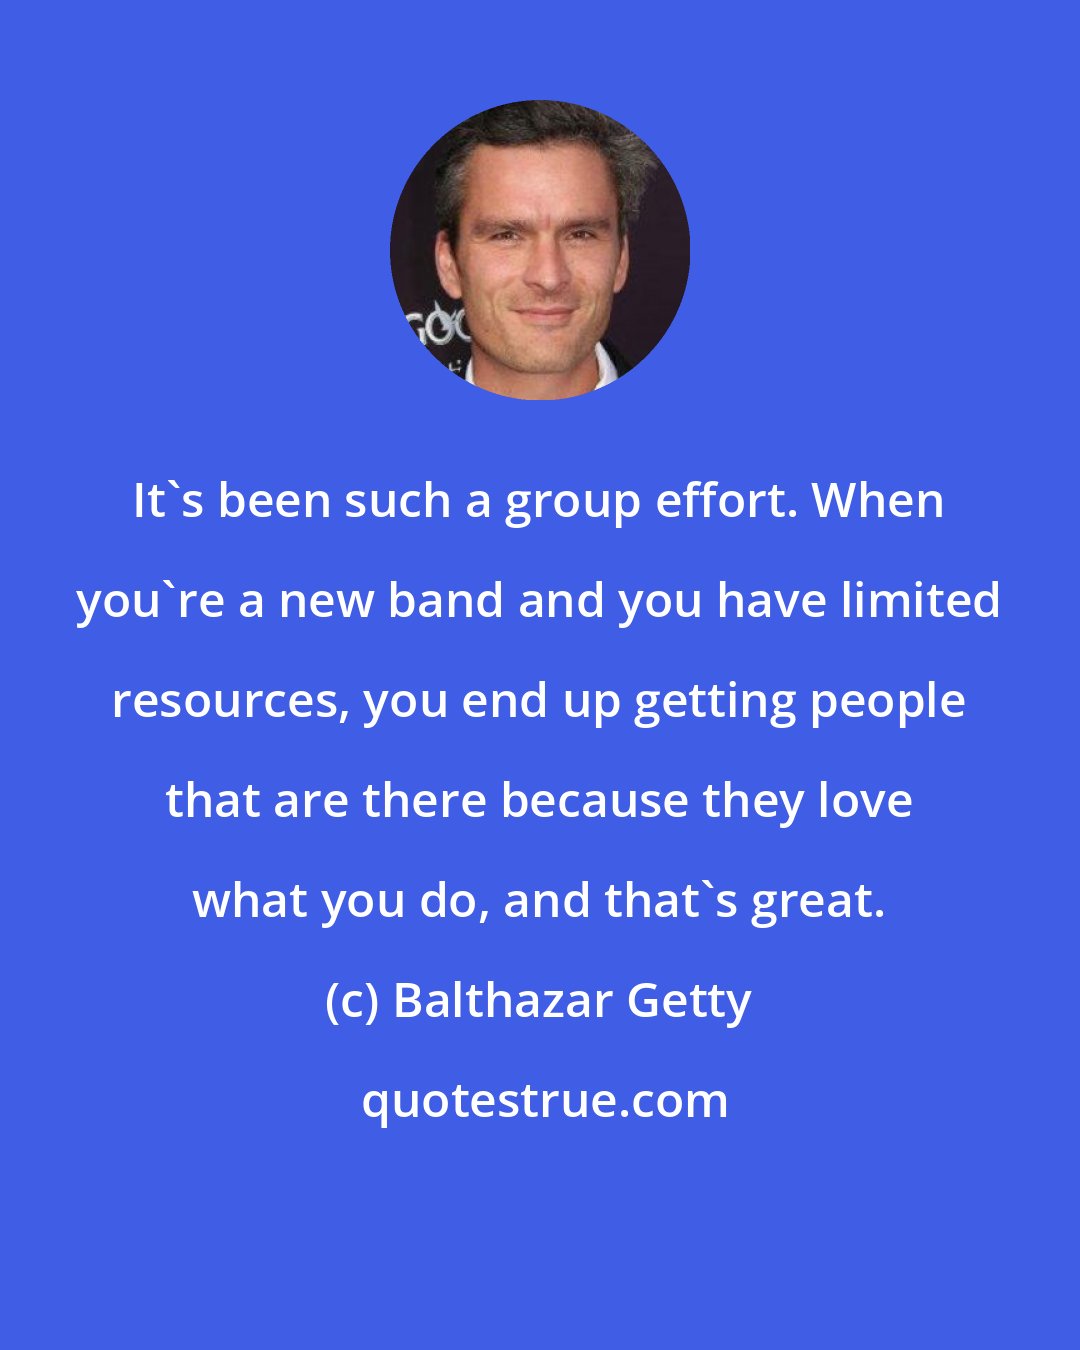 Balthazar Getty: It's been such a group effort. When you're a new band and you have limited resources, you end up getting people that are there because they love what you do, and that's great.